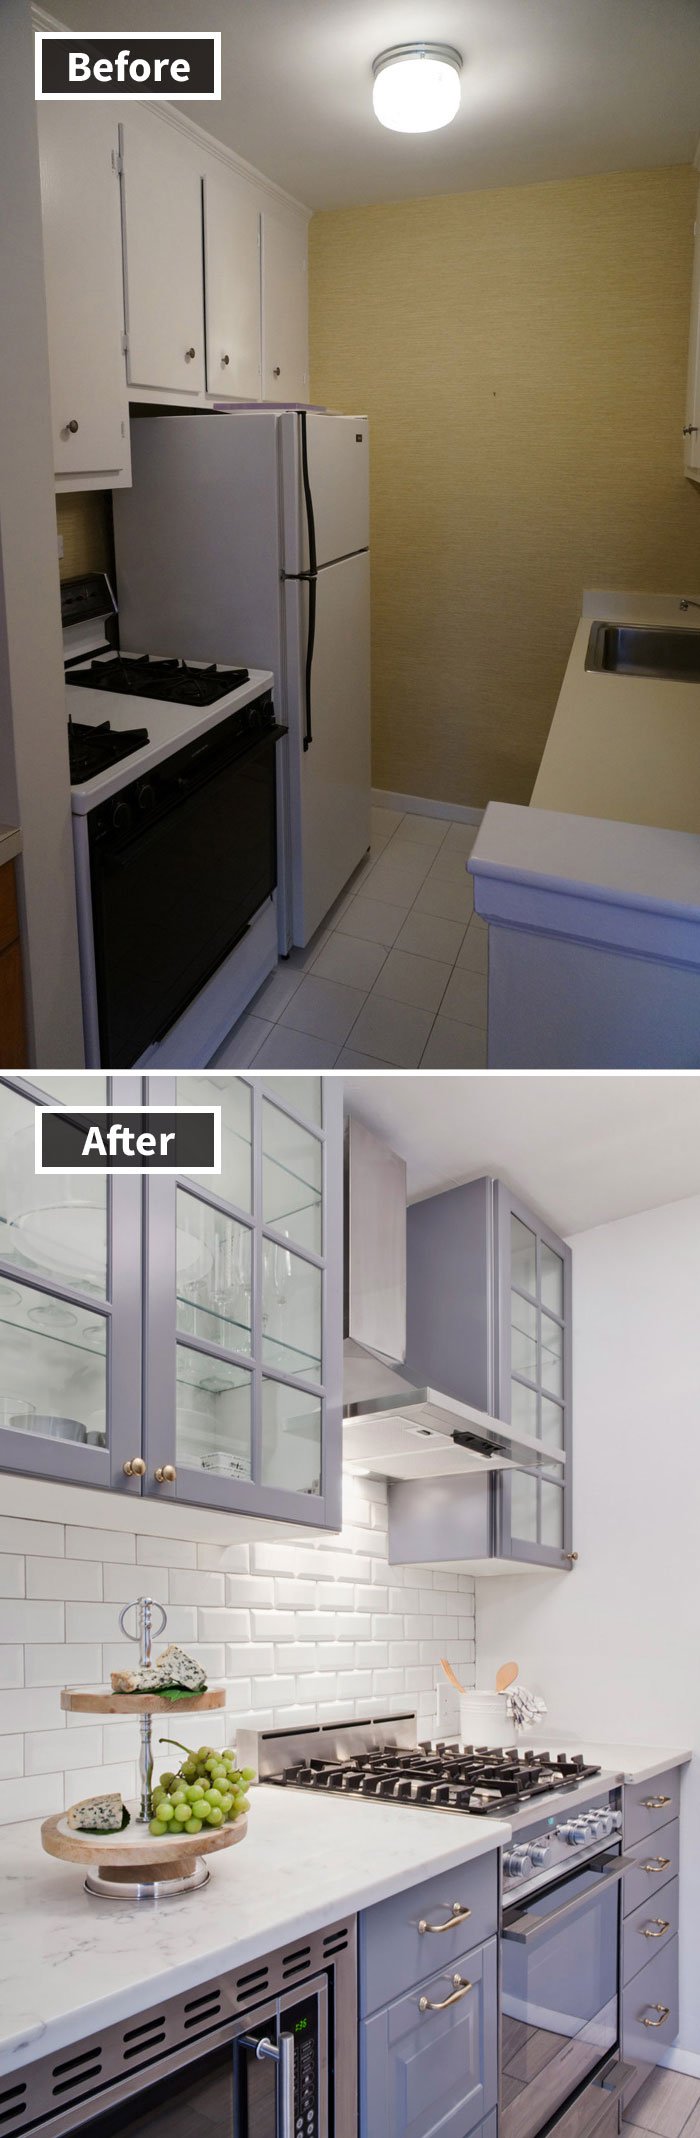 room-makeover-before-after-pics-218-5b4dd656a2e7d-700.jpg